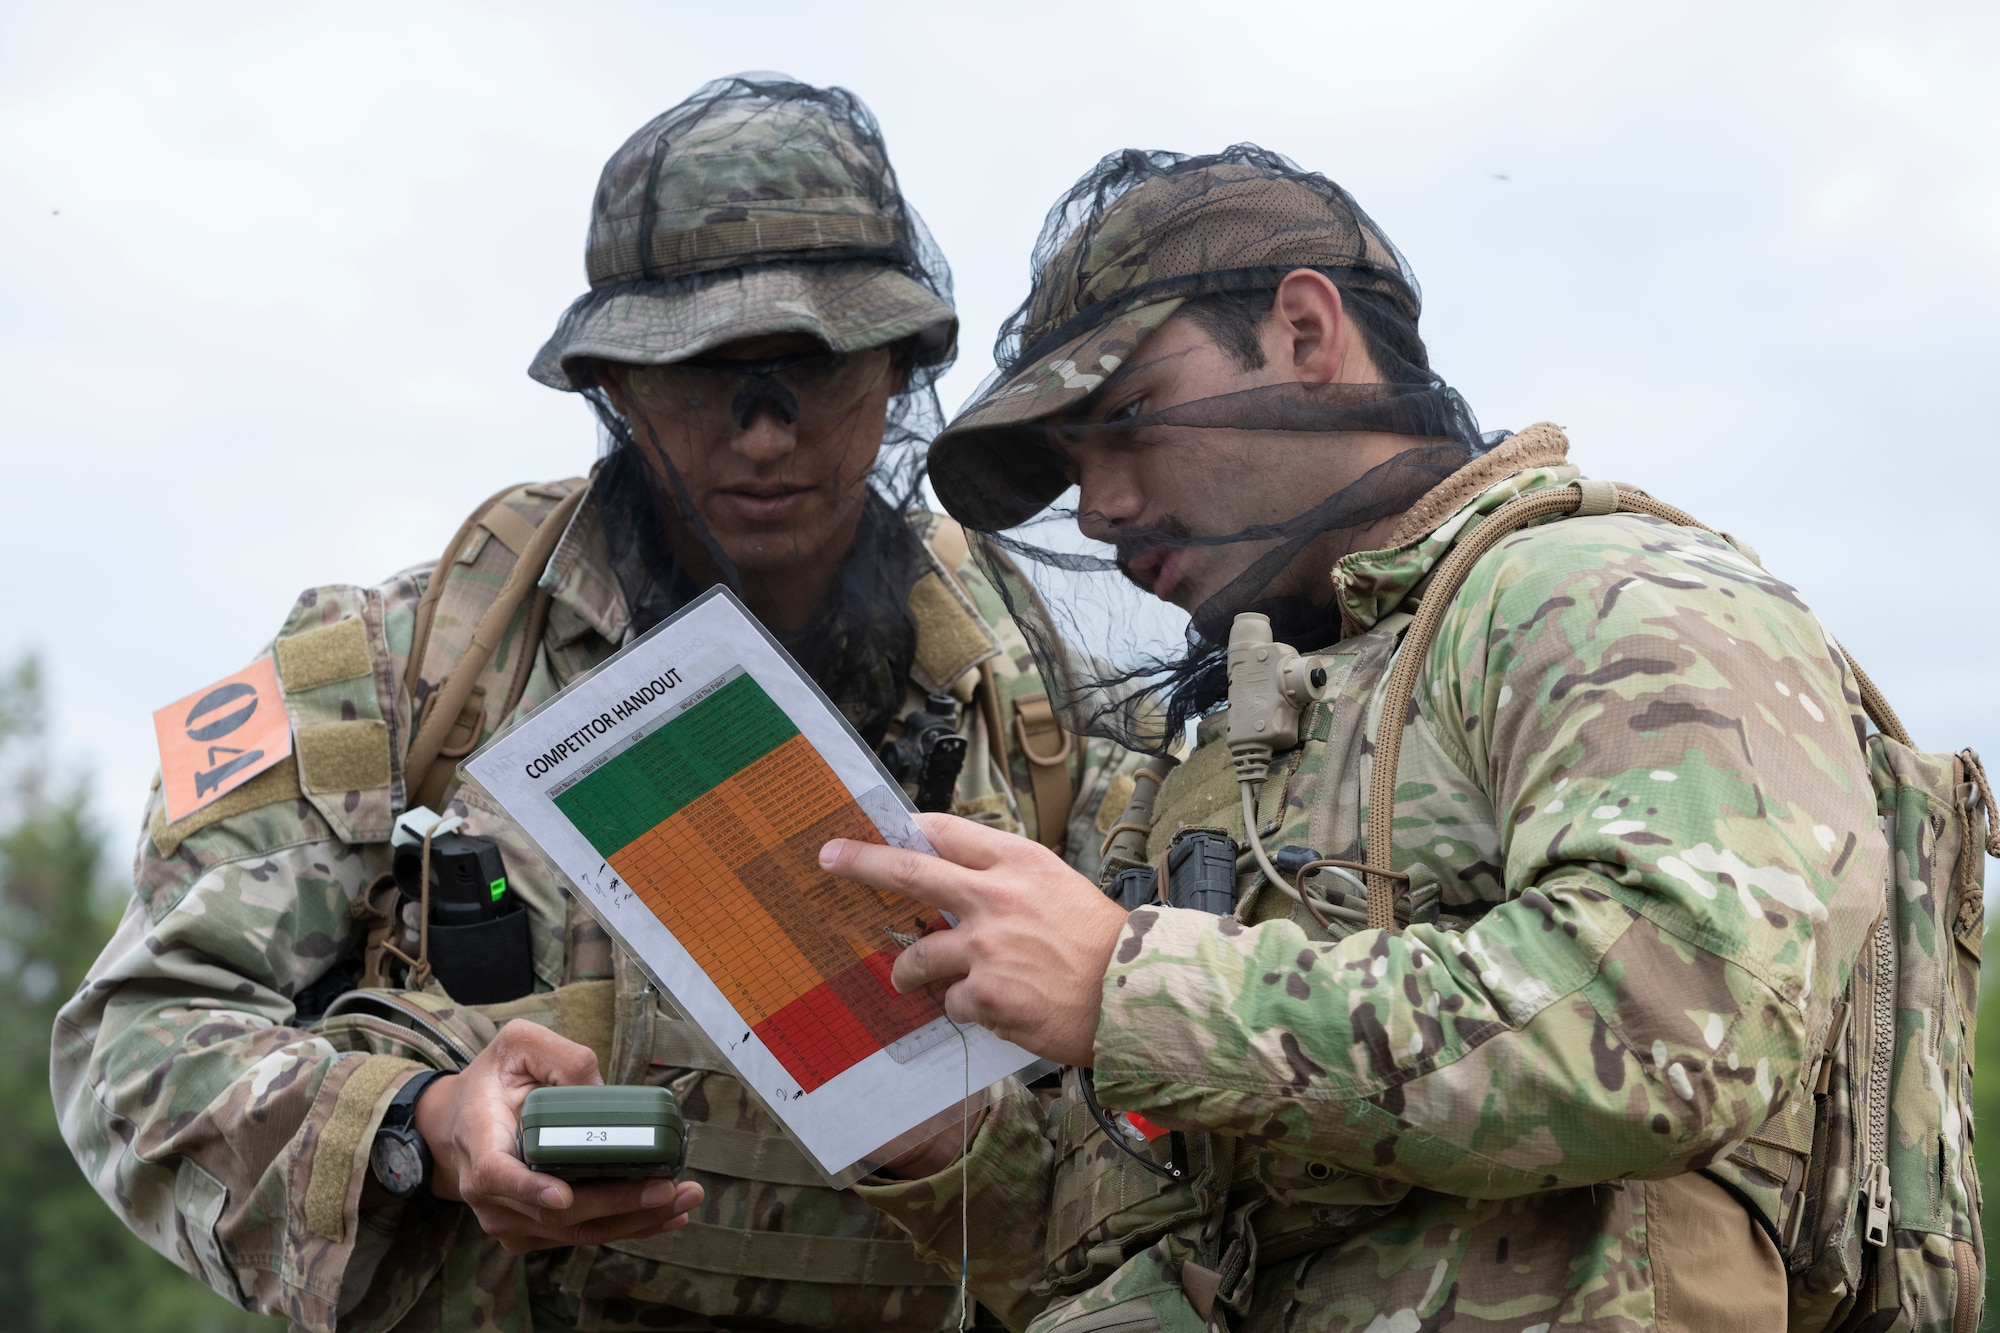 U.S. Air Force Staff Sgt. Leodan Zapata, left, and Senior Airman Mario Hernandez, tactical air control party (TACP) specialists, 5th Air Support Operations Squadron, prepare for a land navigation event during the Chaos Challenge 2021 at Joint Base Elmendorf-Richardson, Alaska, July 14, 2021. The Chaos Challenge 2021 was a multi-day series of mental and physical contests sponsored by the 1st Air Support Operations Group with participants from the 3rd, 5th, 25th, and 604th Air Support Operations Squadrons and a guest team from the 673d Security Forces Squadron. The winner of the competition will go on to compete in Lightning Challenge 2021 to determine the best two-man TACP team in the Air Force.